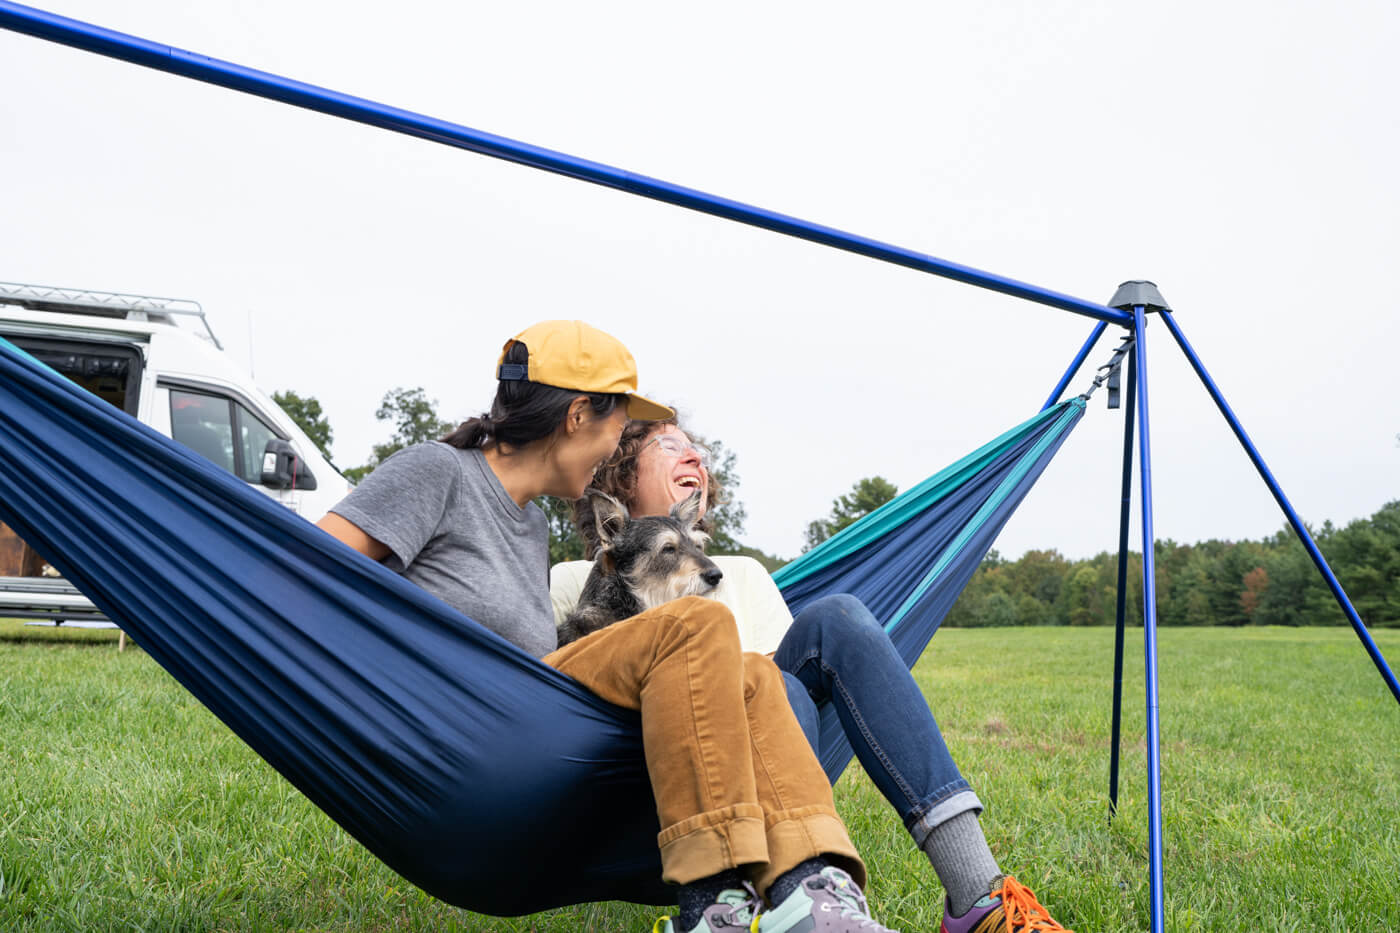 Two people share a hammock while relaxing in a Nomad Hammock Stand while traveling in their van.